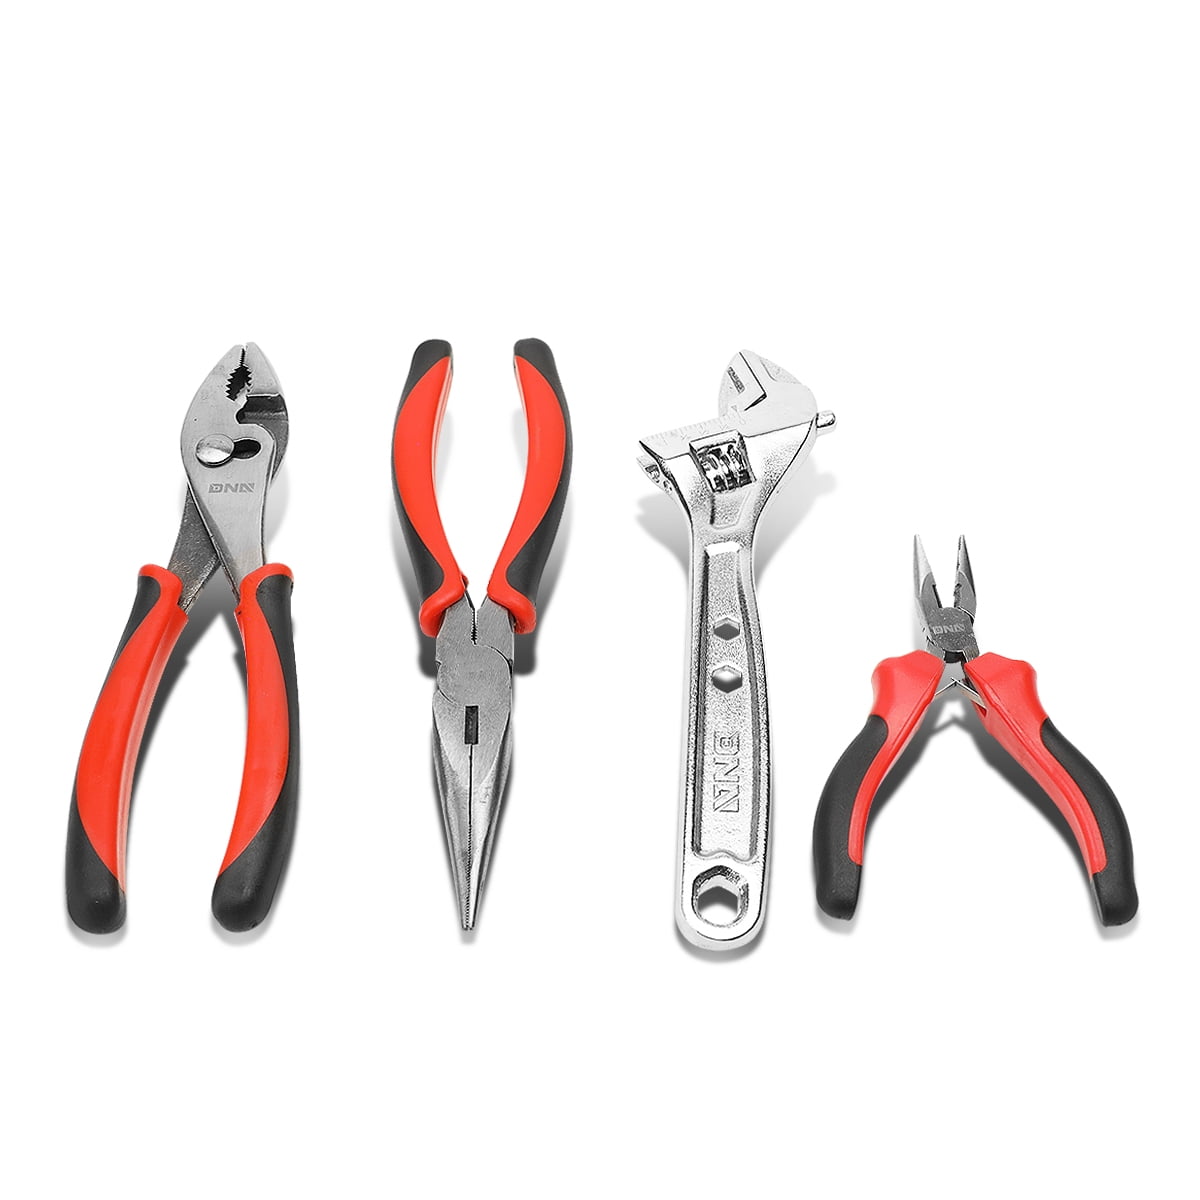 TitanFinish So NWS 109-69-165 6.5" High Leverage Combination Pliers CombiMax 